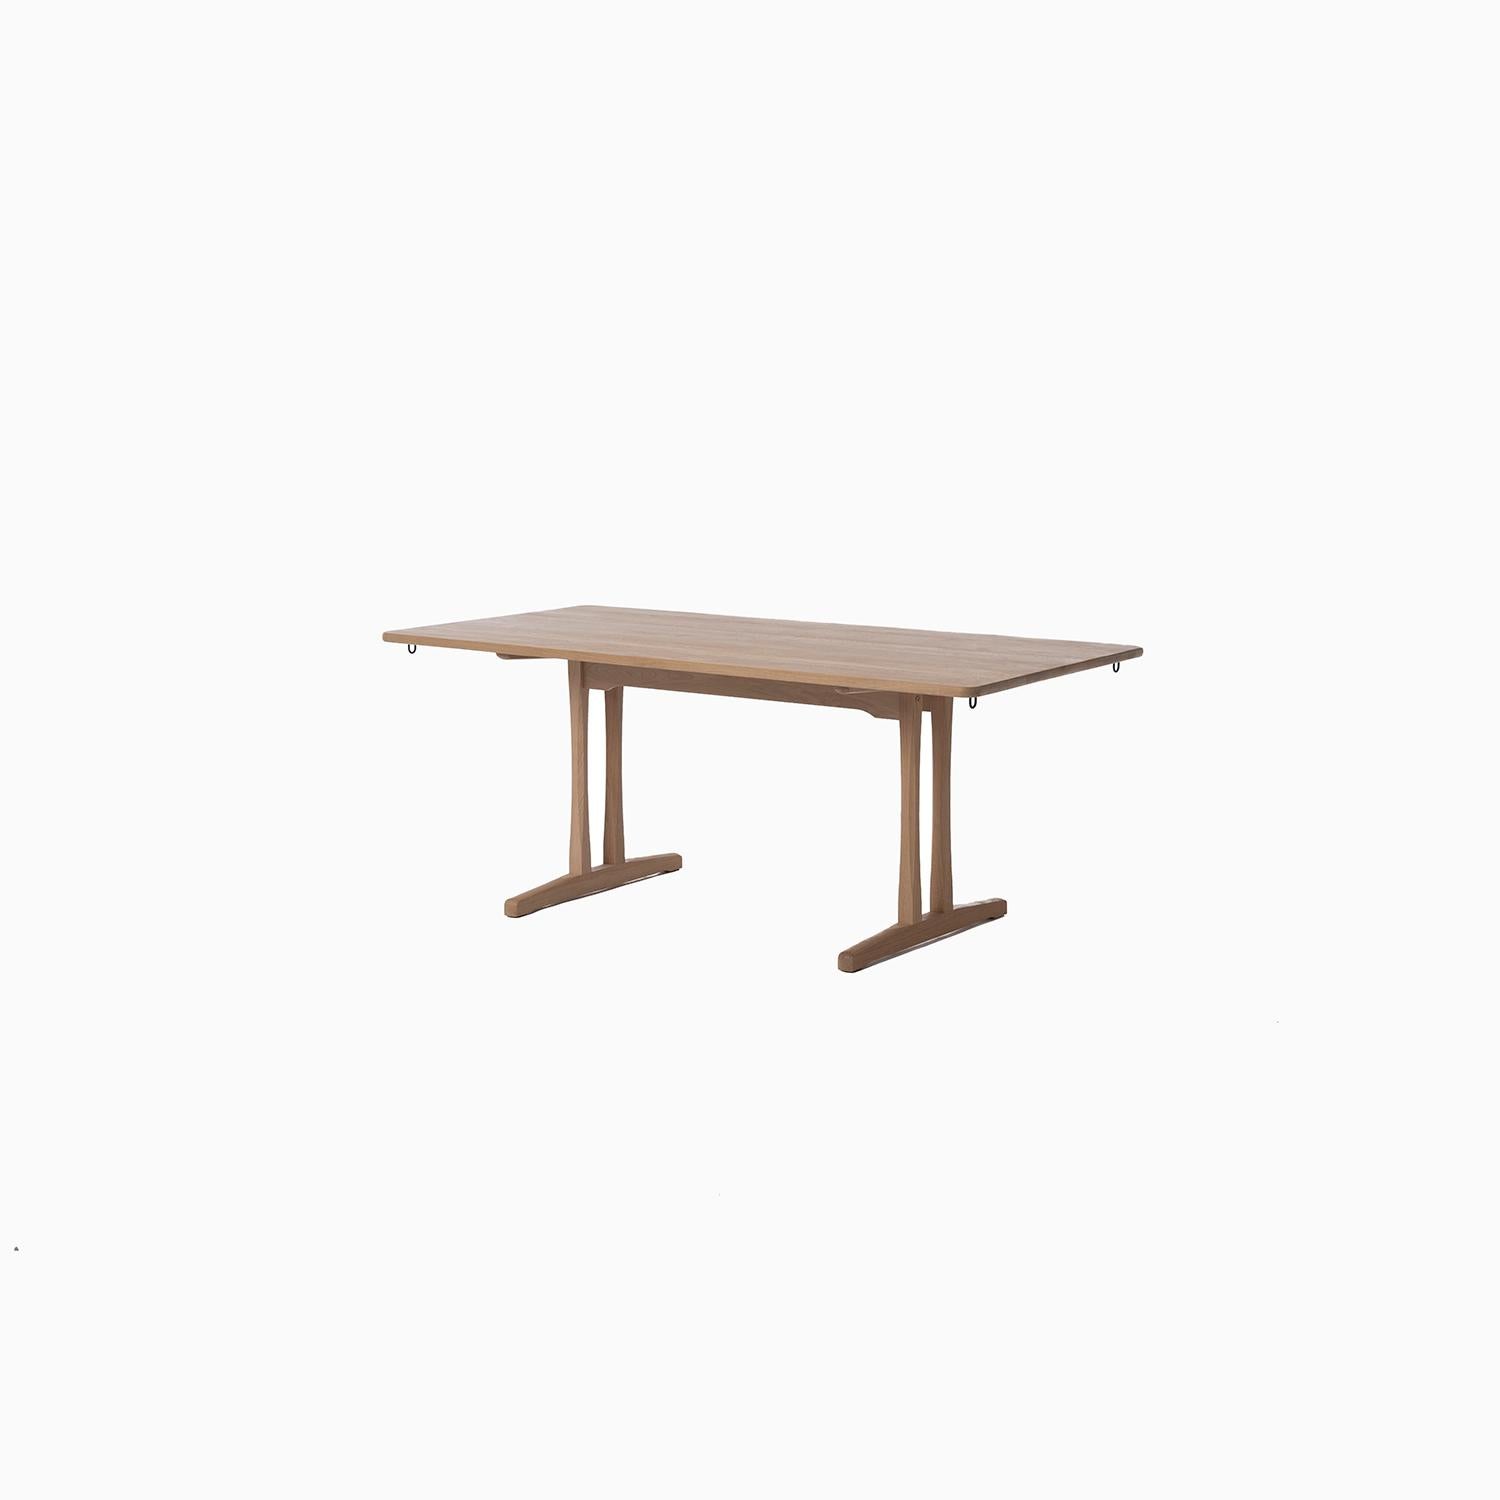 Solid oak dining table with two leaves designed by Børge Mogensen for Fredericia. A newer production with coated black extension leaves.


Professional, skilled furniture restoration is an integral part of what we do every day. Our goal 
is to